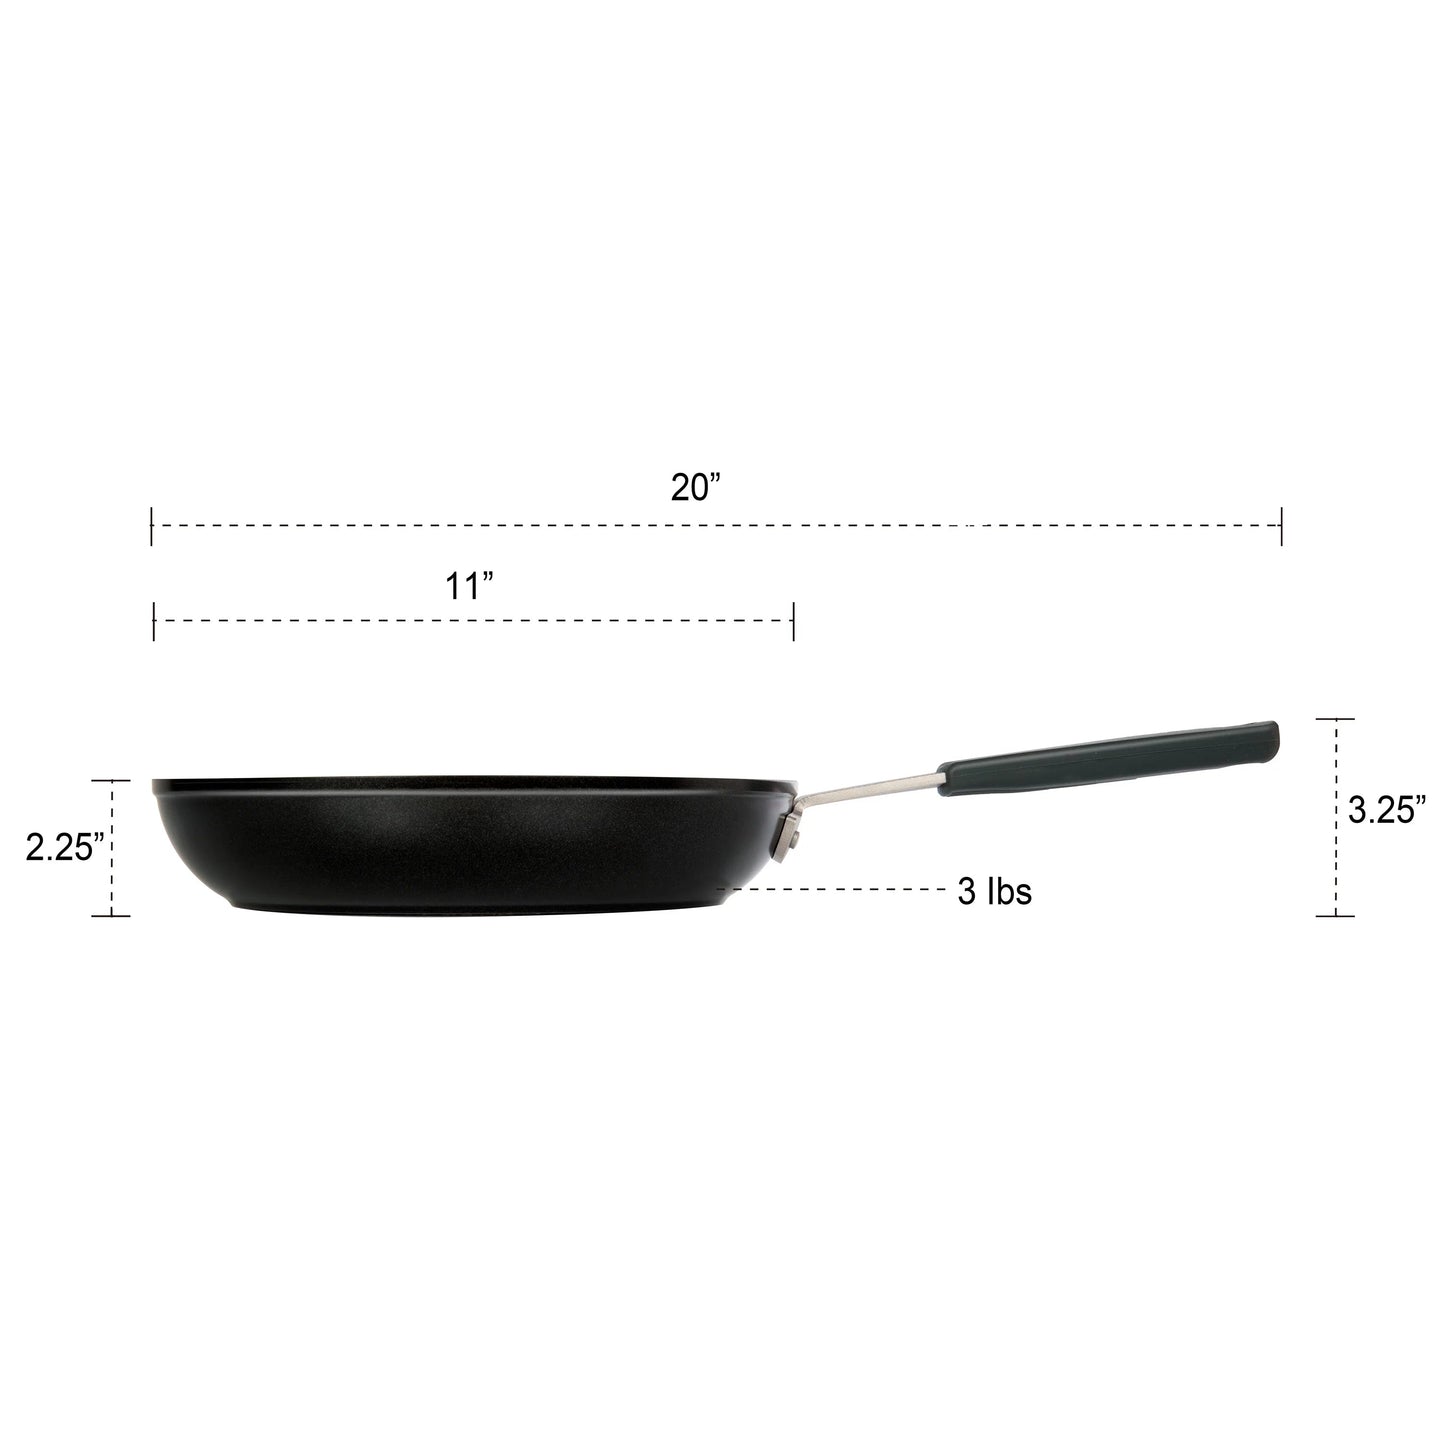 MASTERPAN Chef's Series 11" 4-Layer Ceramic Re-Enforced Non-Stick Cast Aluminum Frying Pan and Skillet With Riveted Stainless Steel Handle and Removable Silicone Handle Cover